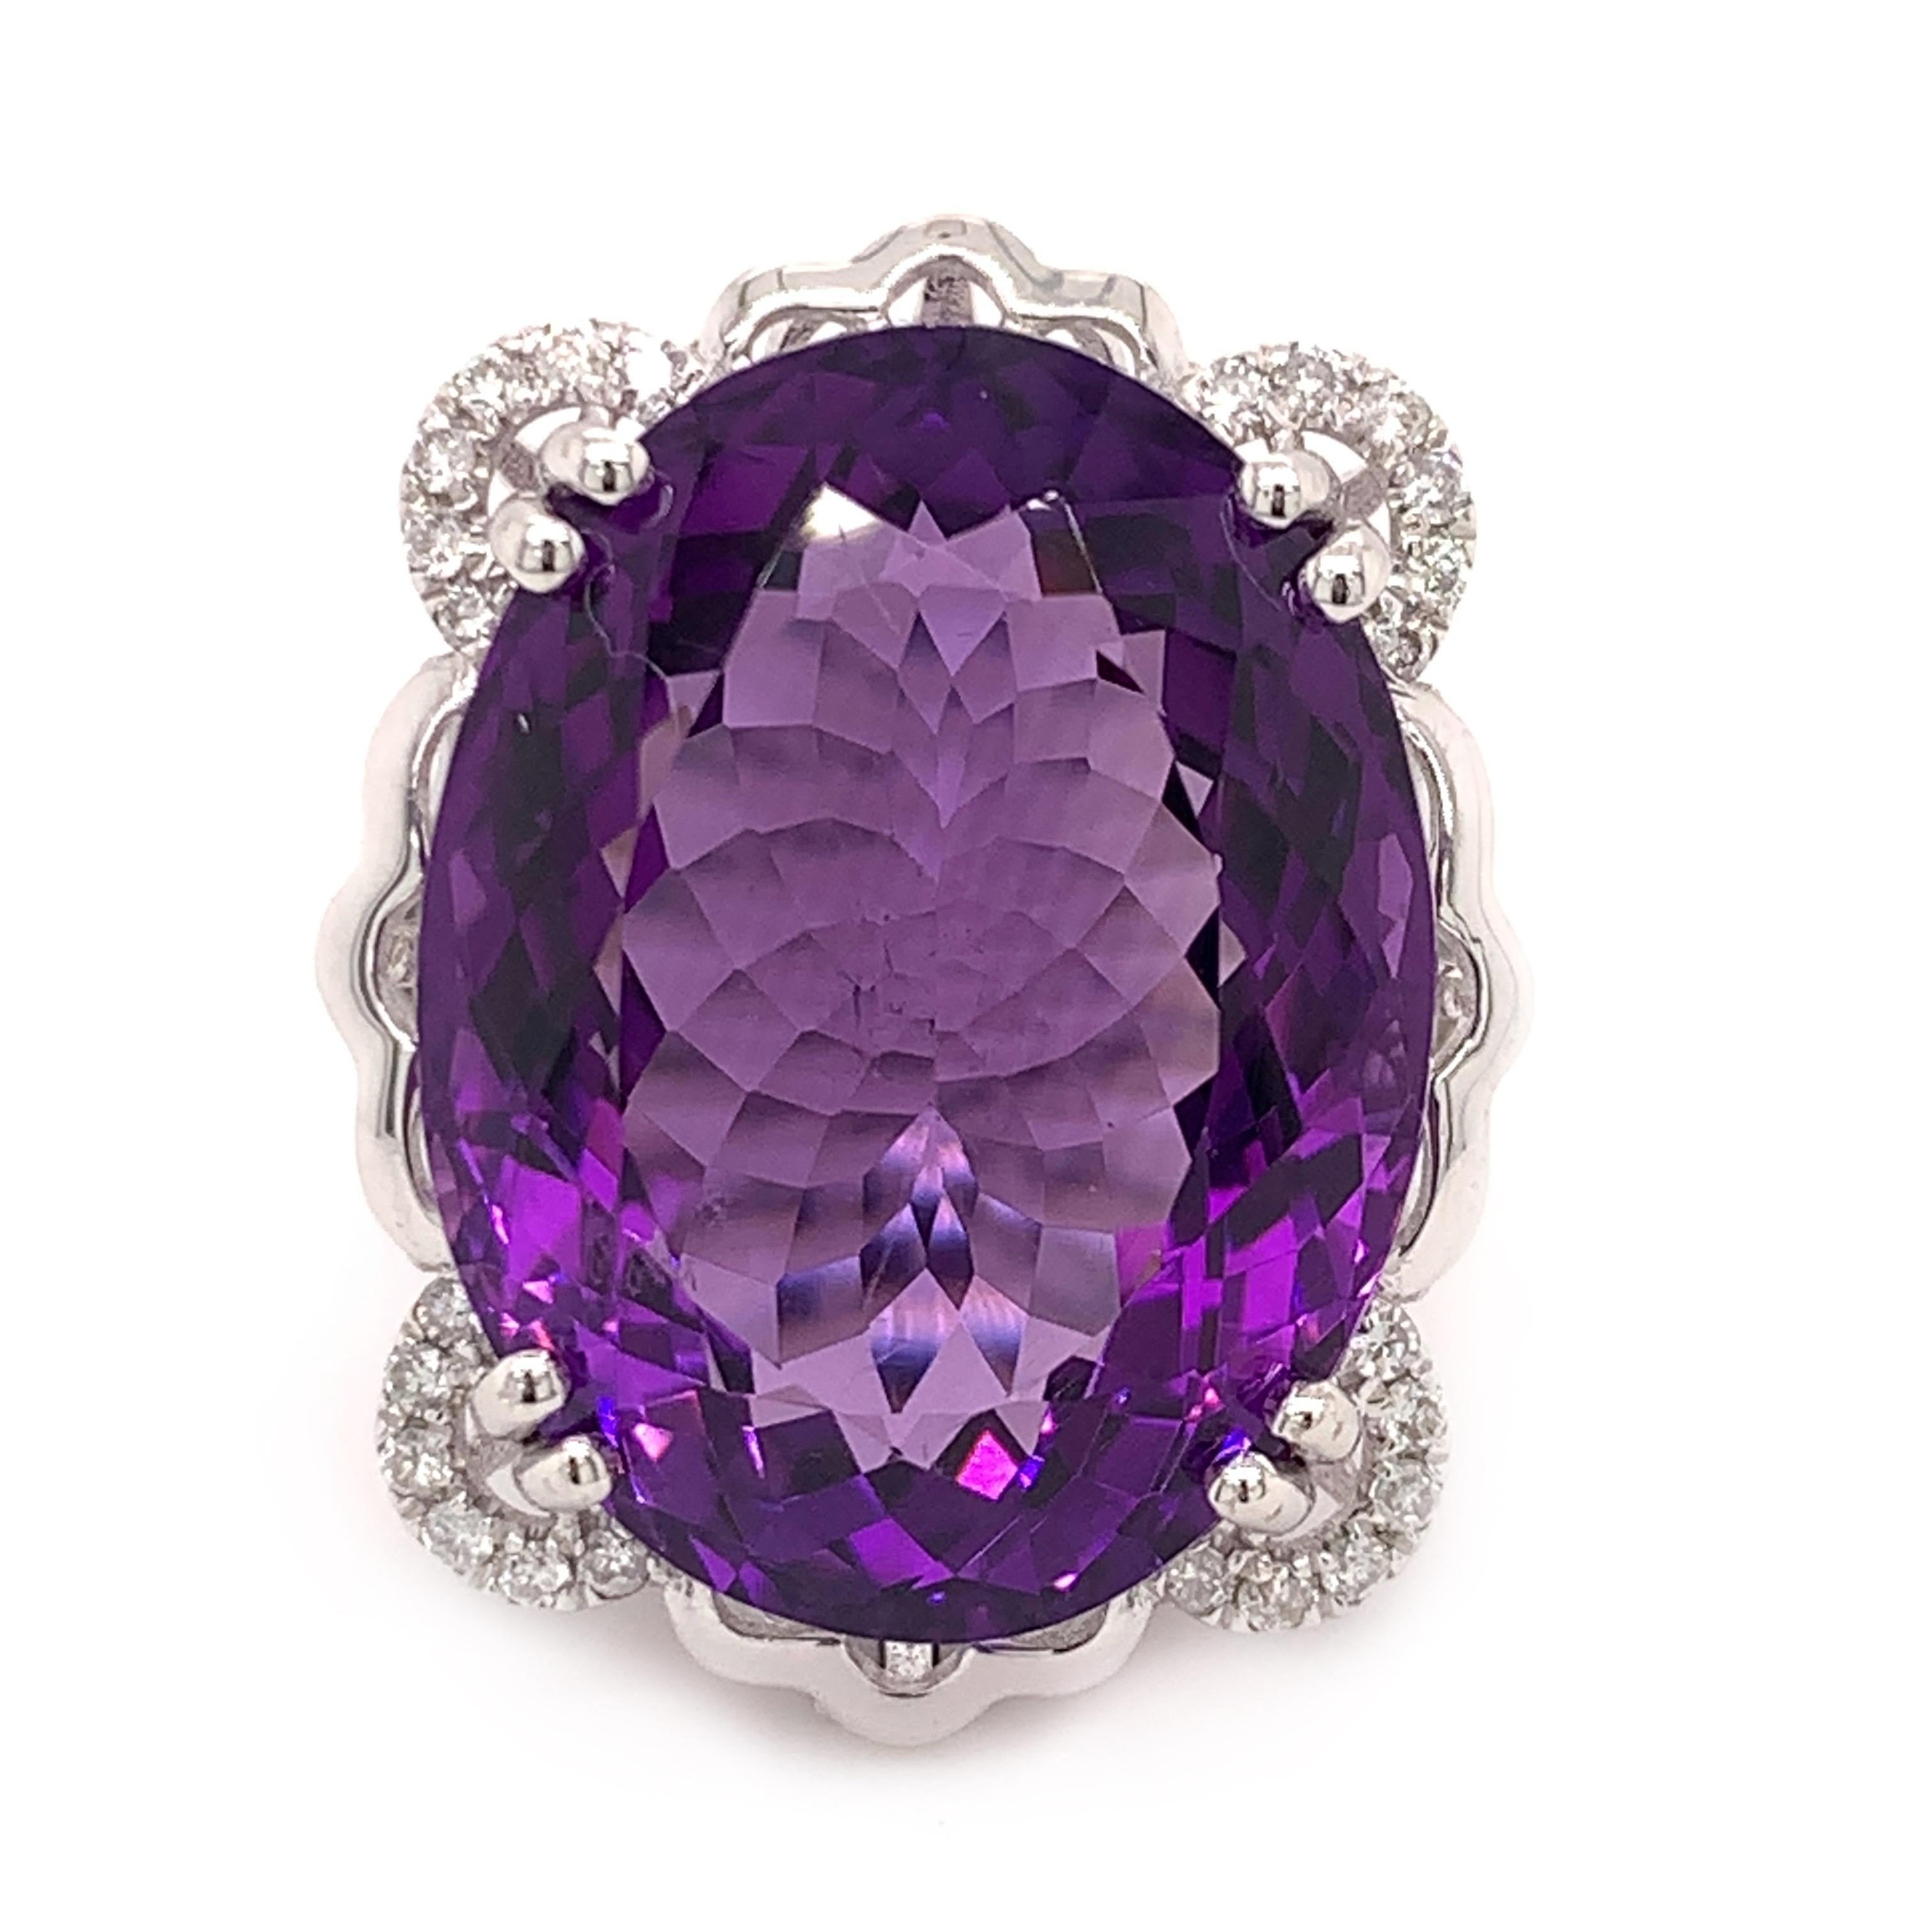 Glamorous amethyst diamond cocktail ring. High brilliance, transparent clean, rich eggplant purple tone, natural 19.51 carats oval faceted amethyst mounted in an open basket with eight bead prongs, accented with round brilliant cut diamonds.